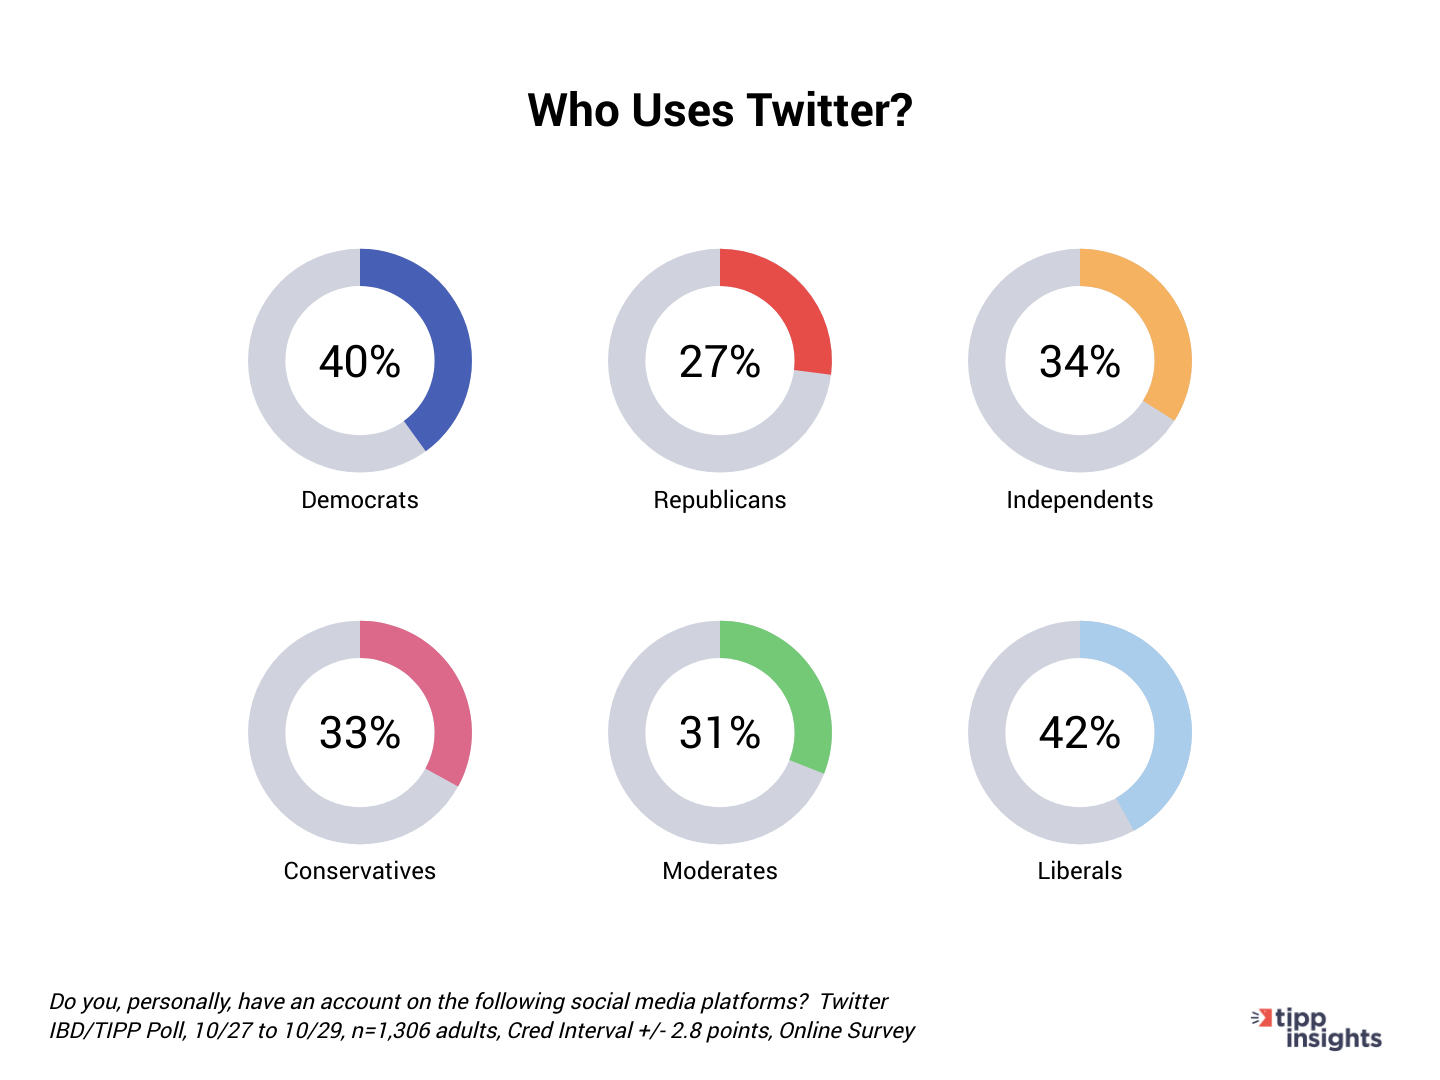 Who uses Twitter?